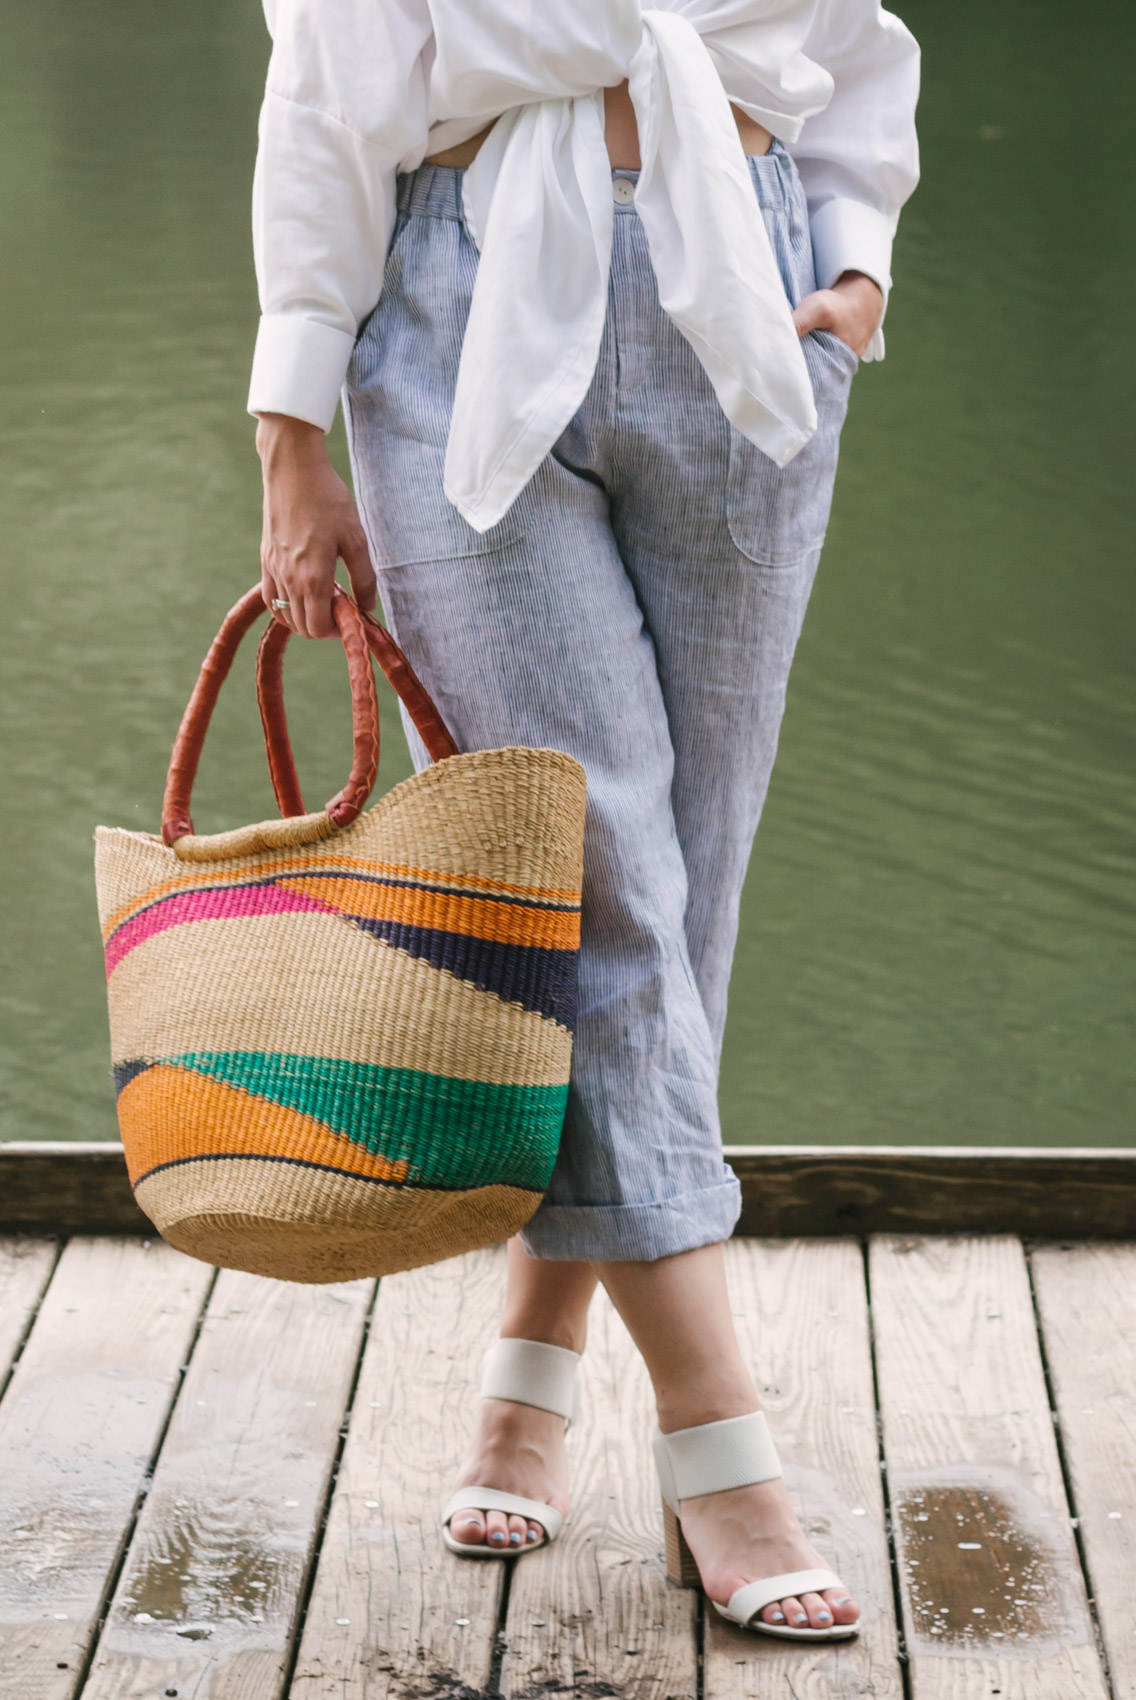 https://allynlewis.com/wp-content/uploads/2020/05/blue-and-white-striped-linen-pants-outfit-lr-3.jpg